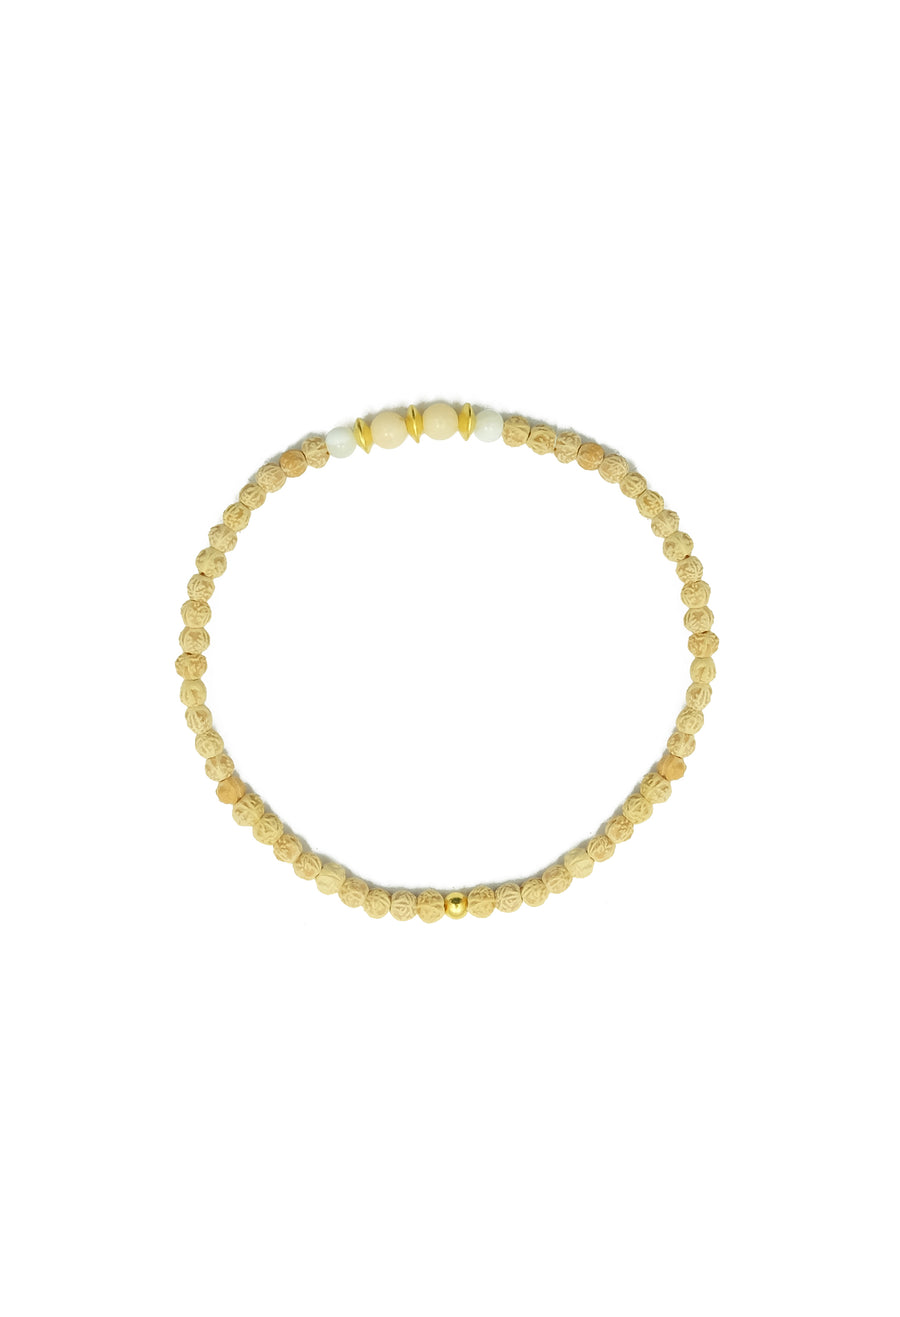 A mesmerizing Uluwatu Moon Bracelet, featuring 2mm rudrani seeds, pink coral, and moonstone beads, adorned with a stunning pearl pendant and 22k gold accents. Inspired by the full-moon casting a radiant runway onto the waves of Uluwatu Beach, this celestial accessory evokes beachside meditations and invites you to trust in the magnificence of the cosmos.